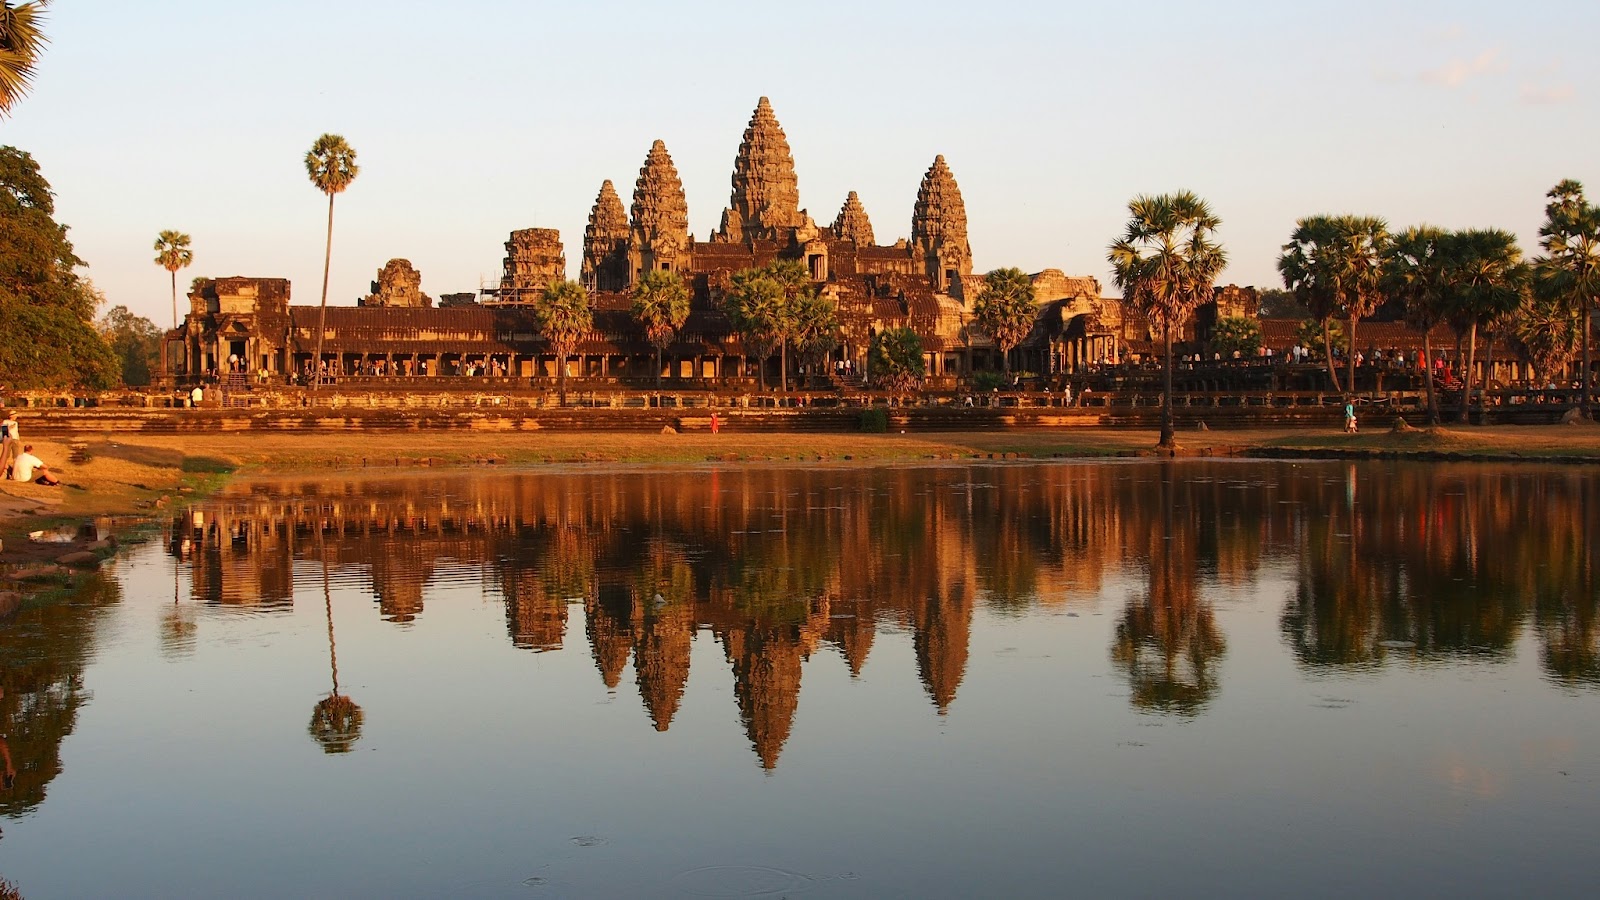 The magnificence of Angkor Wat in Cambodia - A UNESCO World Heritage site.